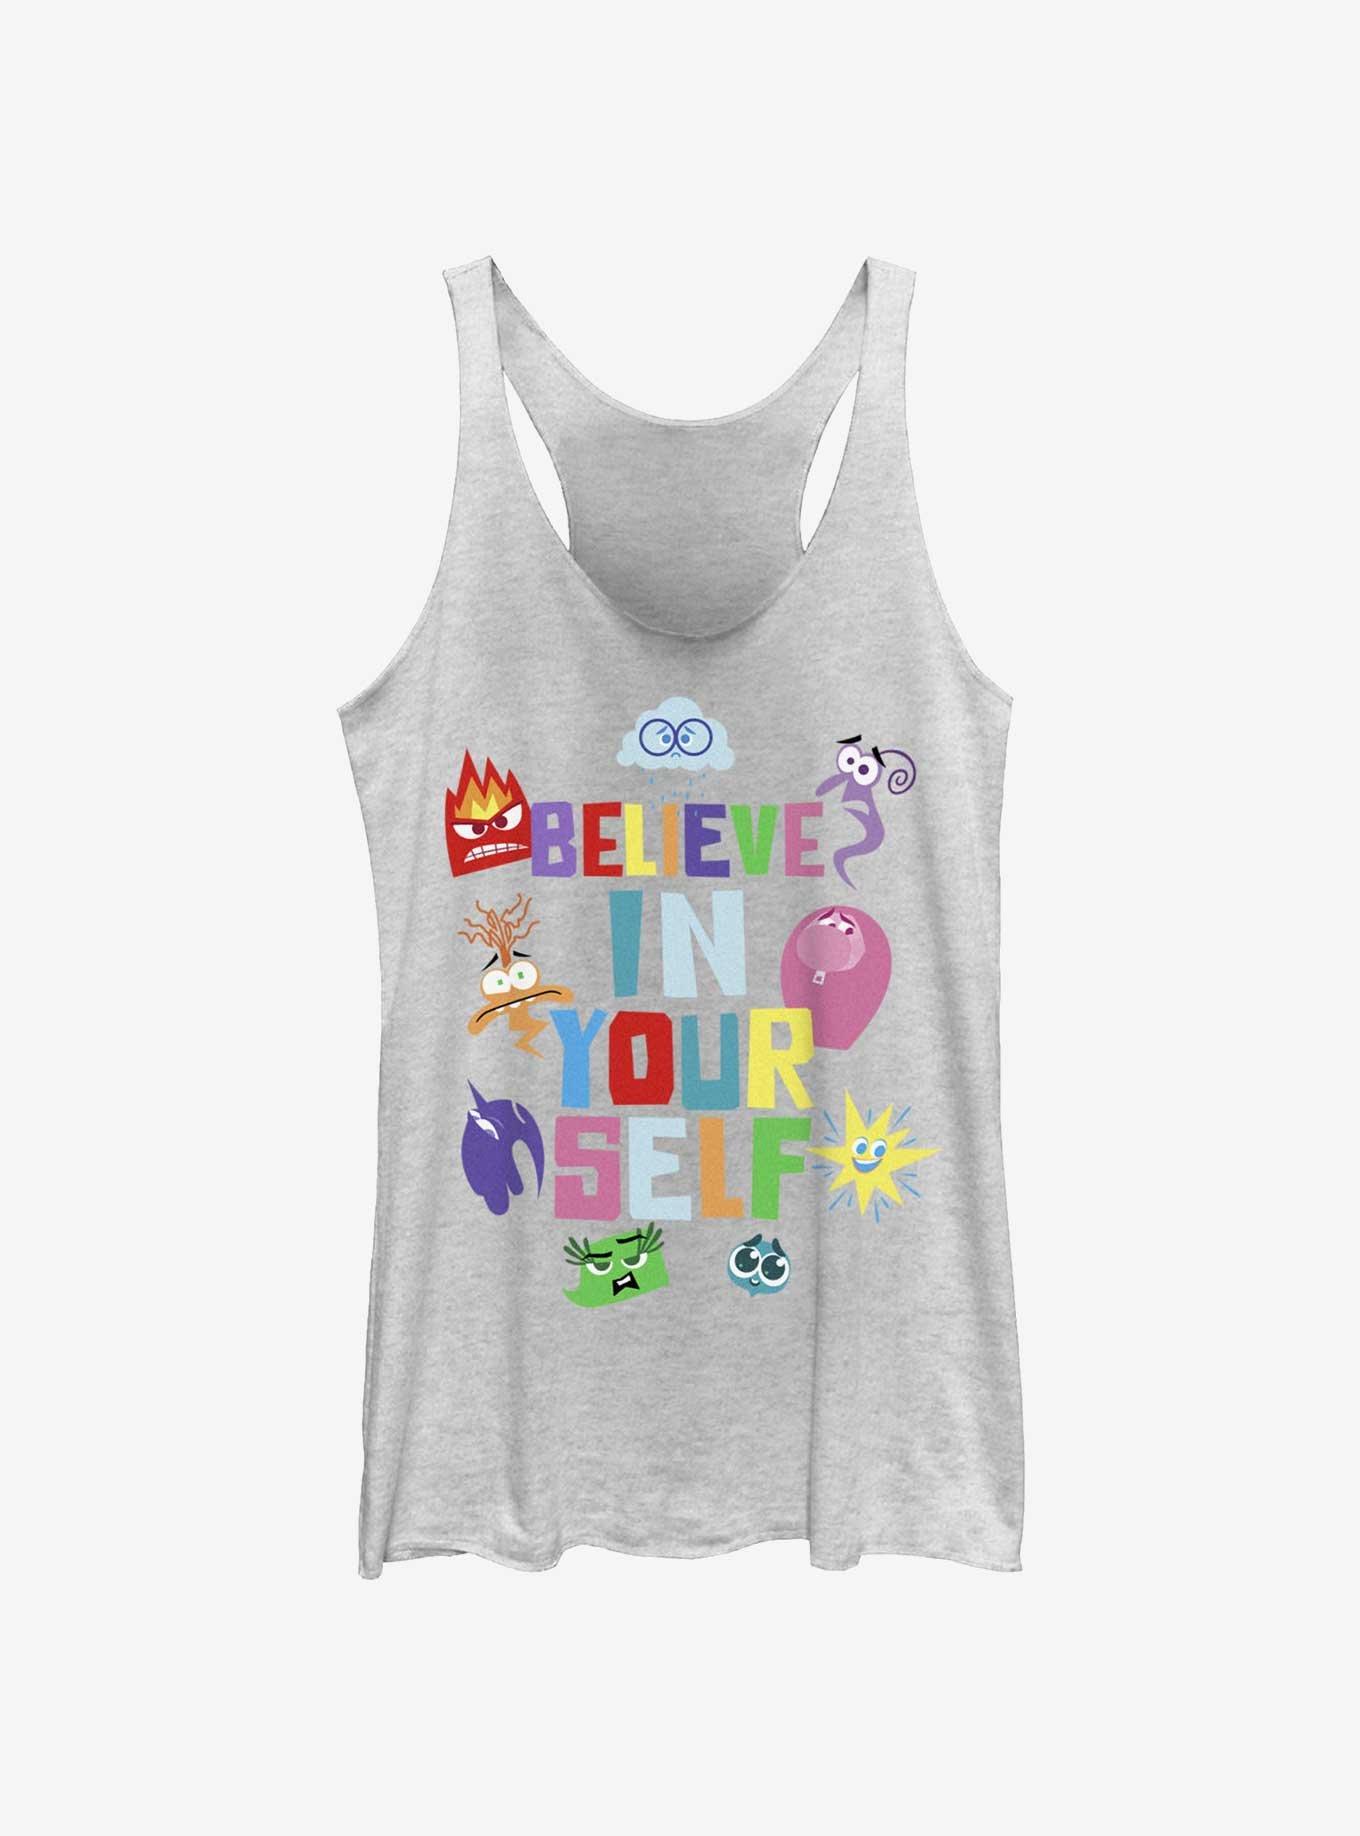 Disney Pixar Inside Out 2 Believe In Your Self Girls Tank, WHITE HTR, hi-res